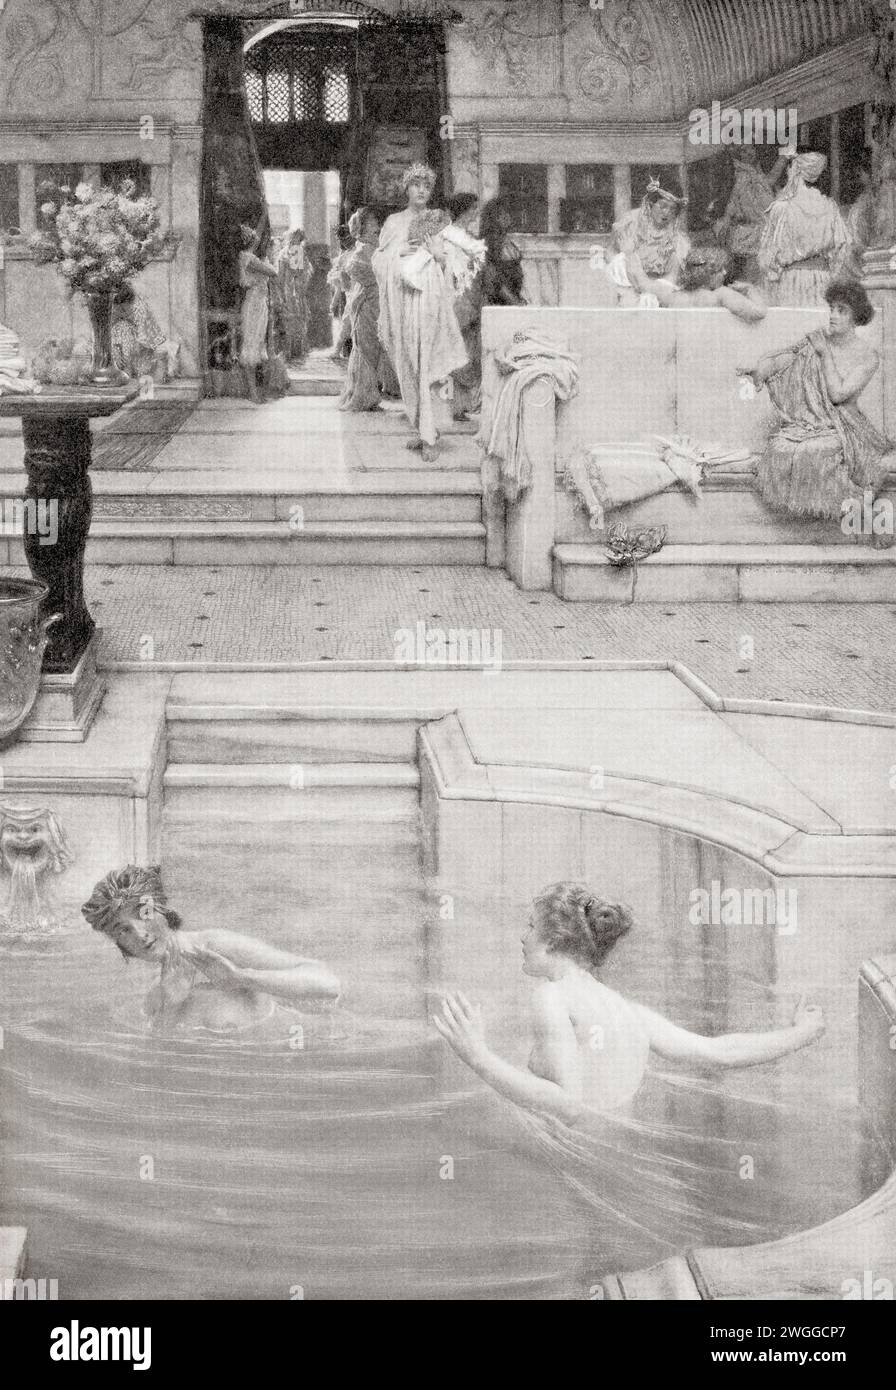 Ladies bathing in the public baths in ancient Rome. Stock Photo